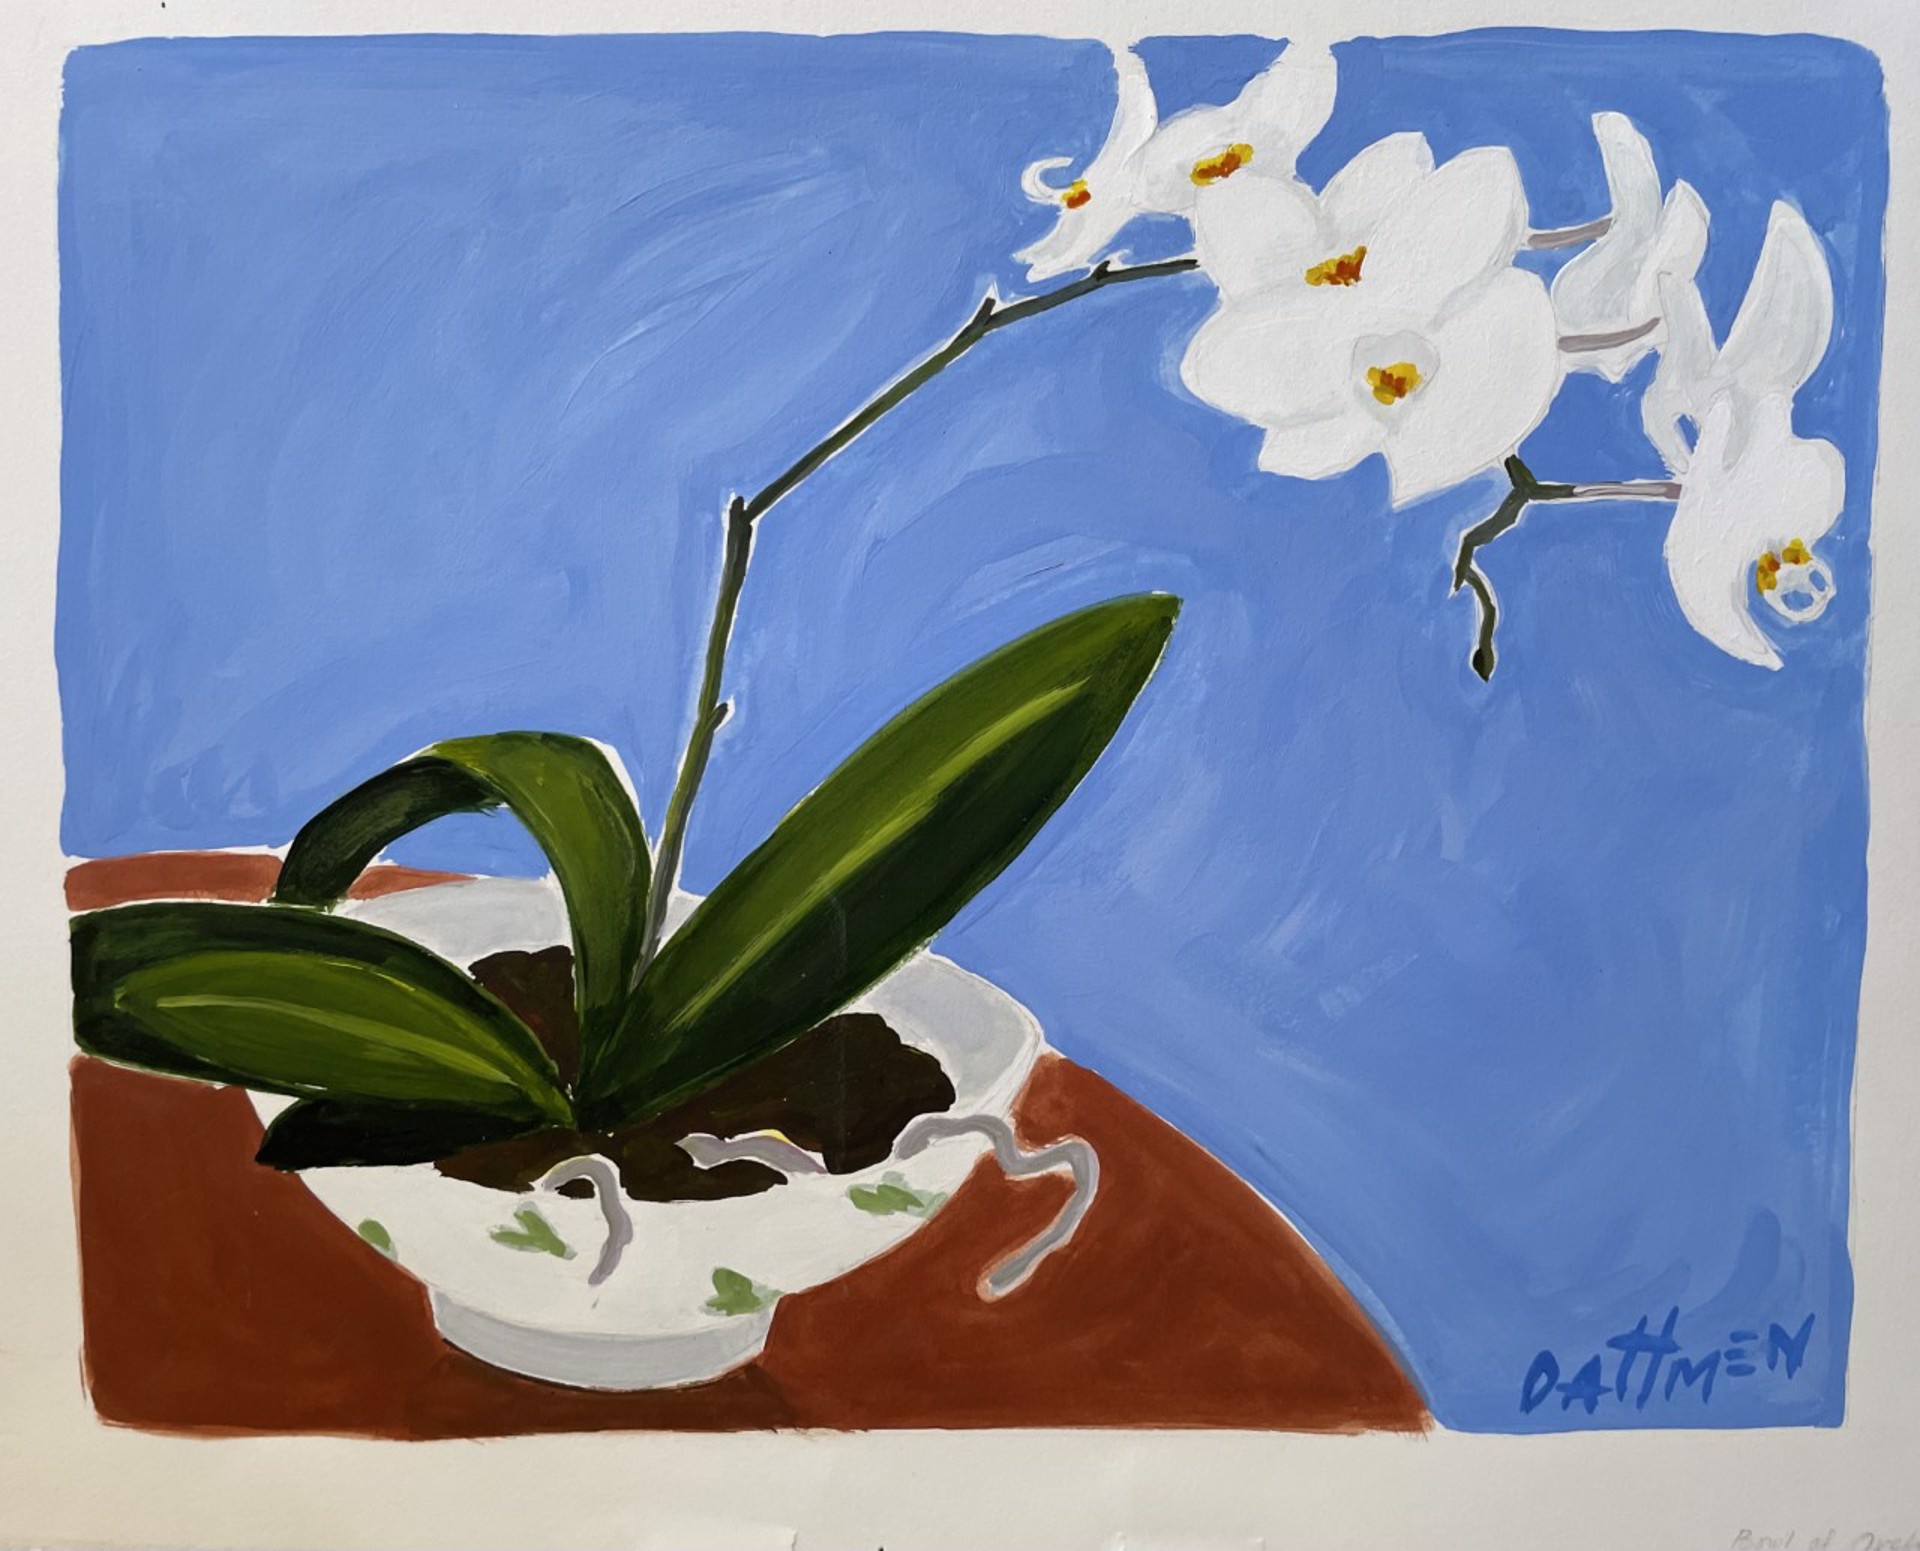 Bowl with Orchid by Jane Dahmen